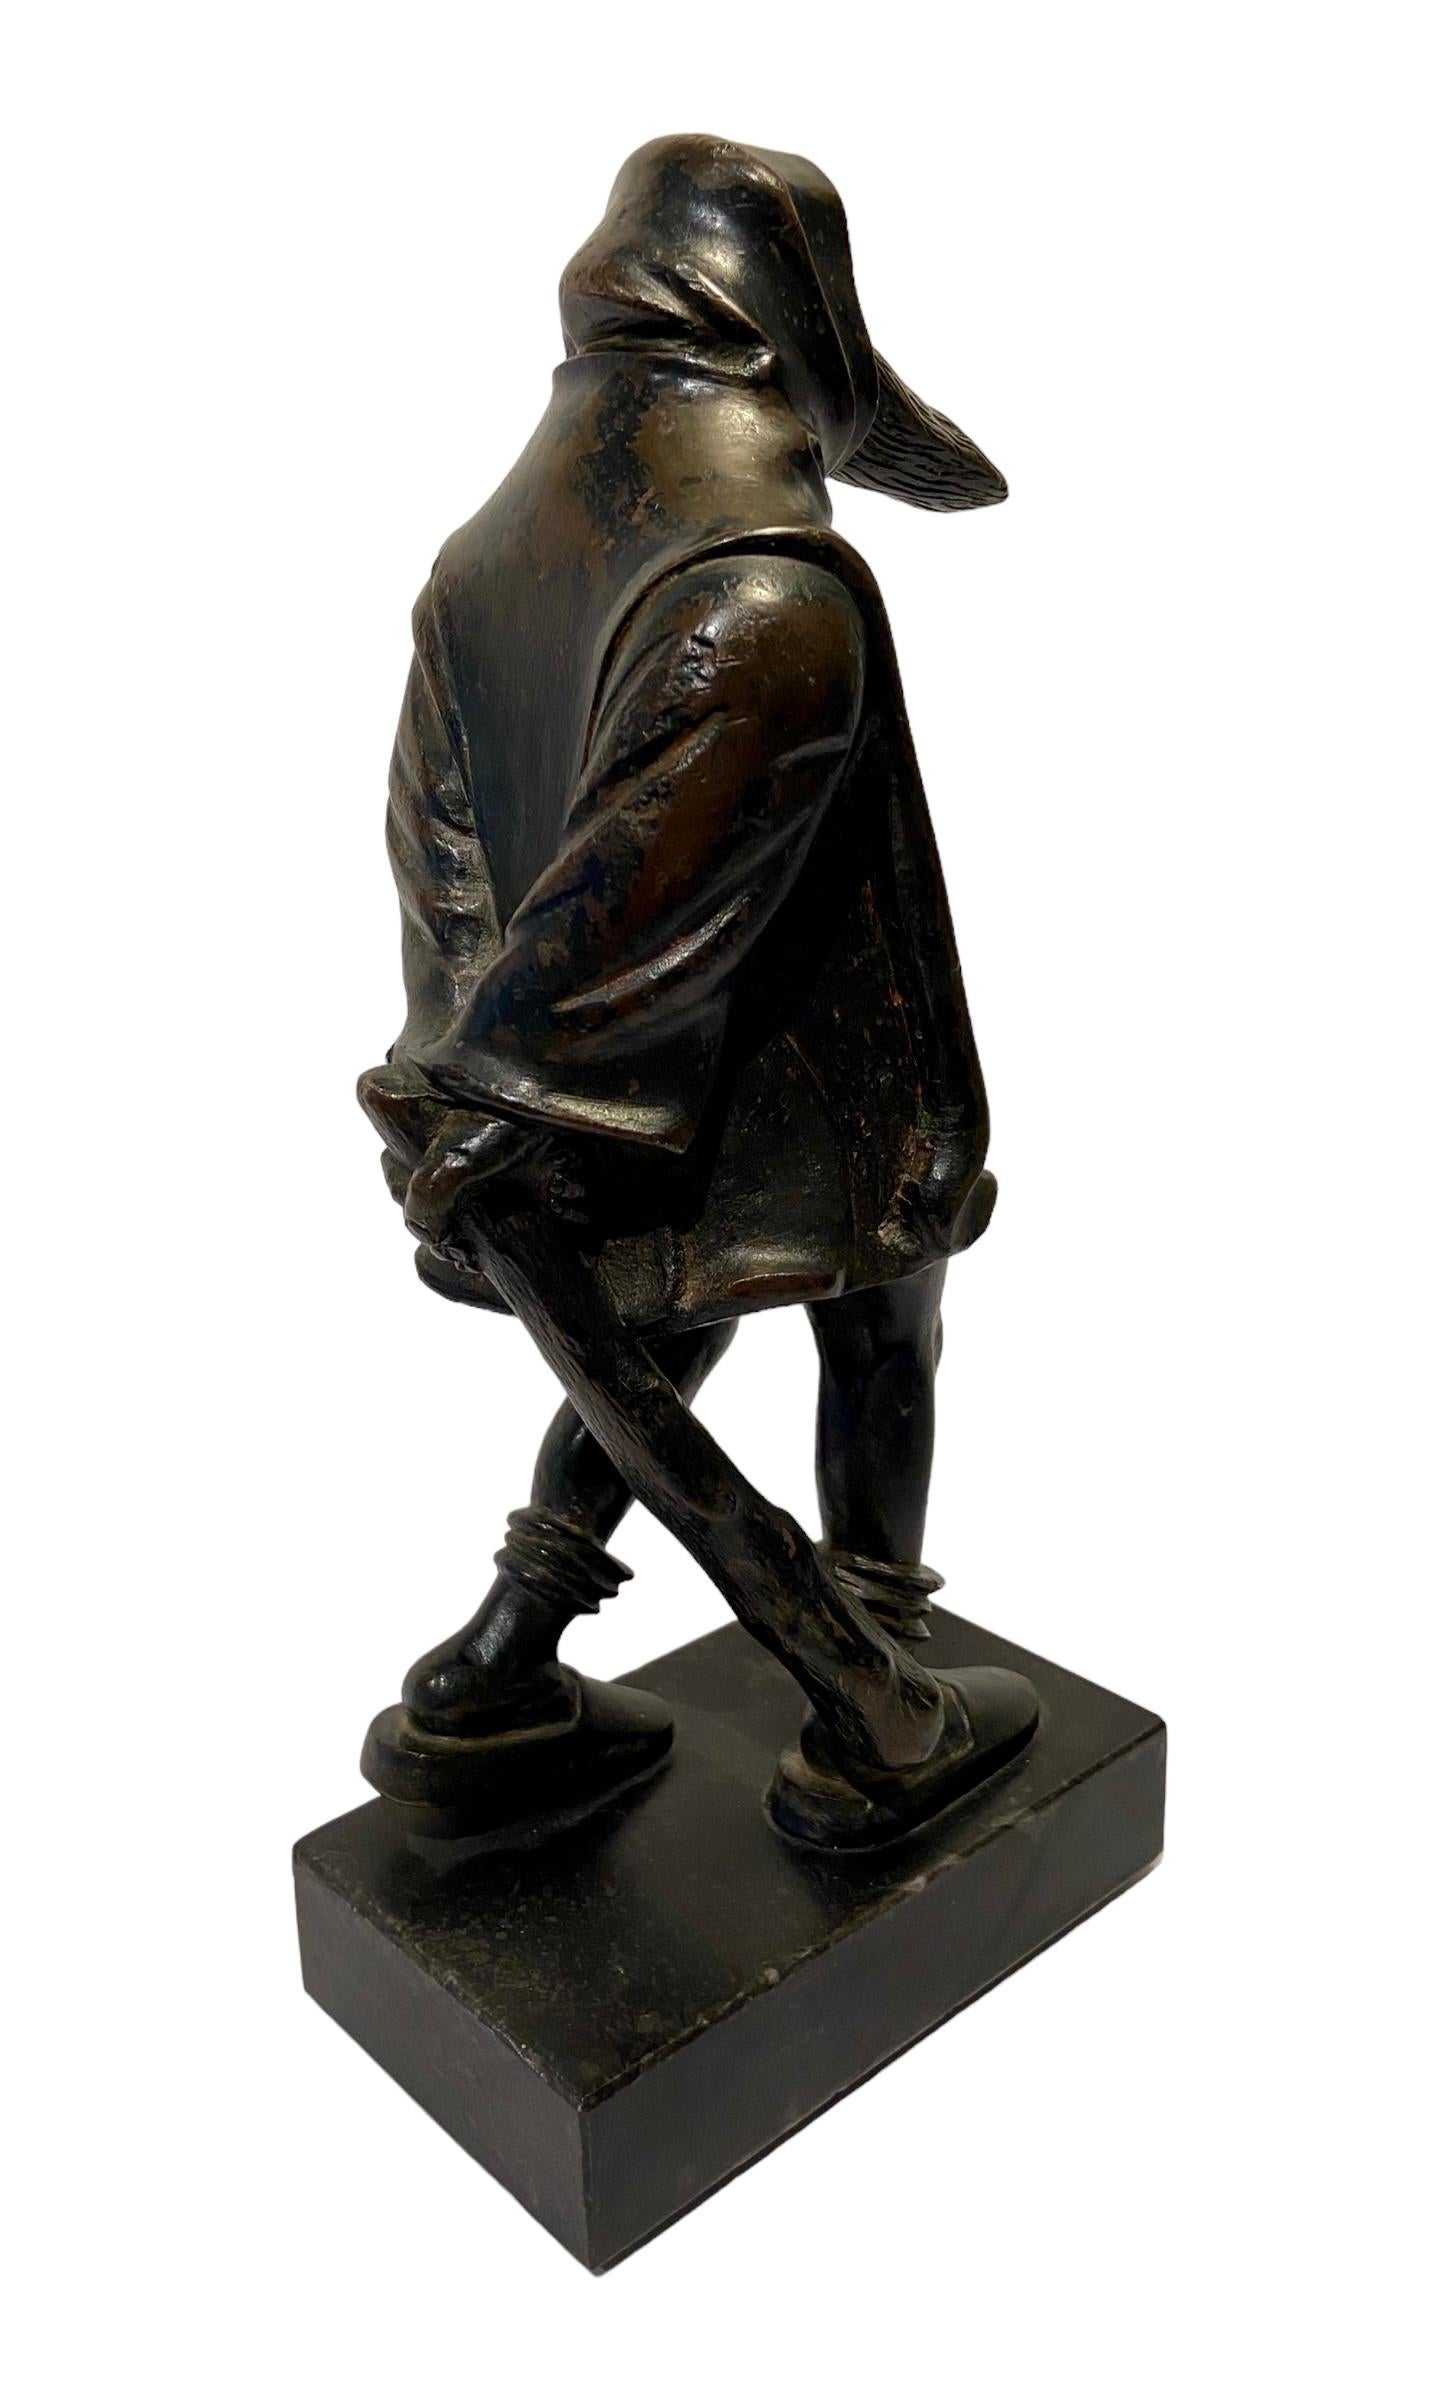 18th Century Savage or folk story figure in bronze. For Sale